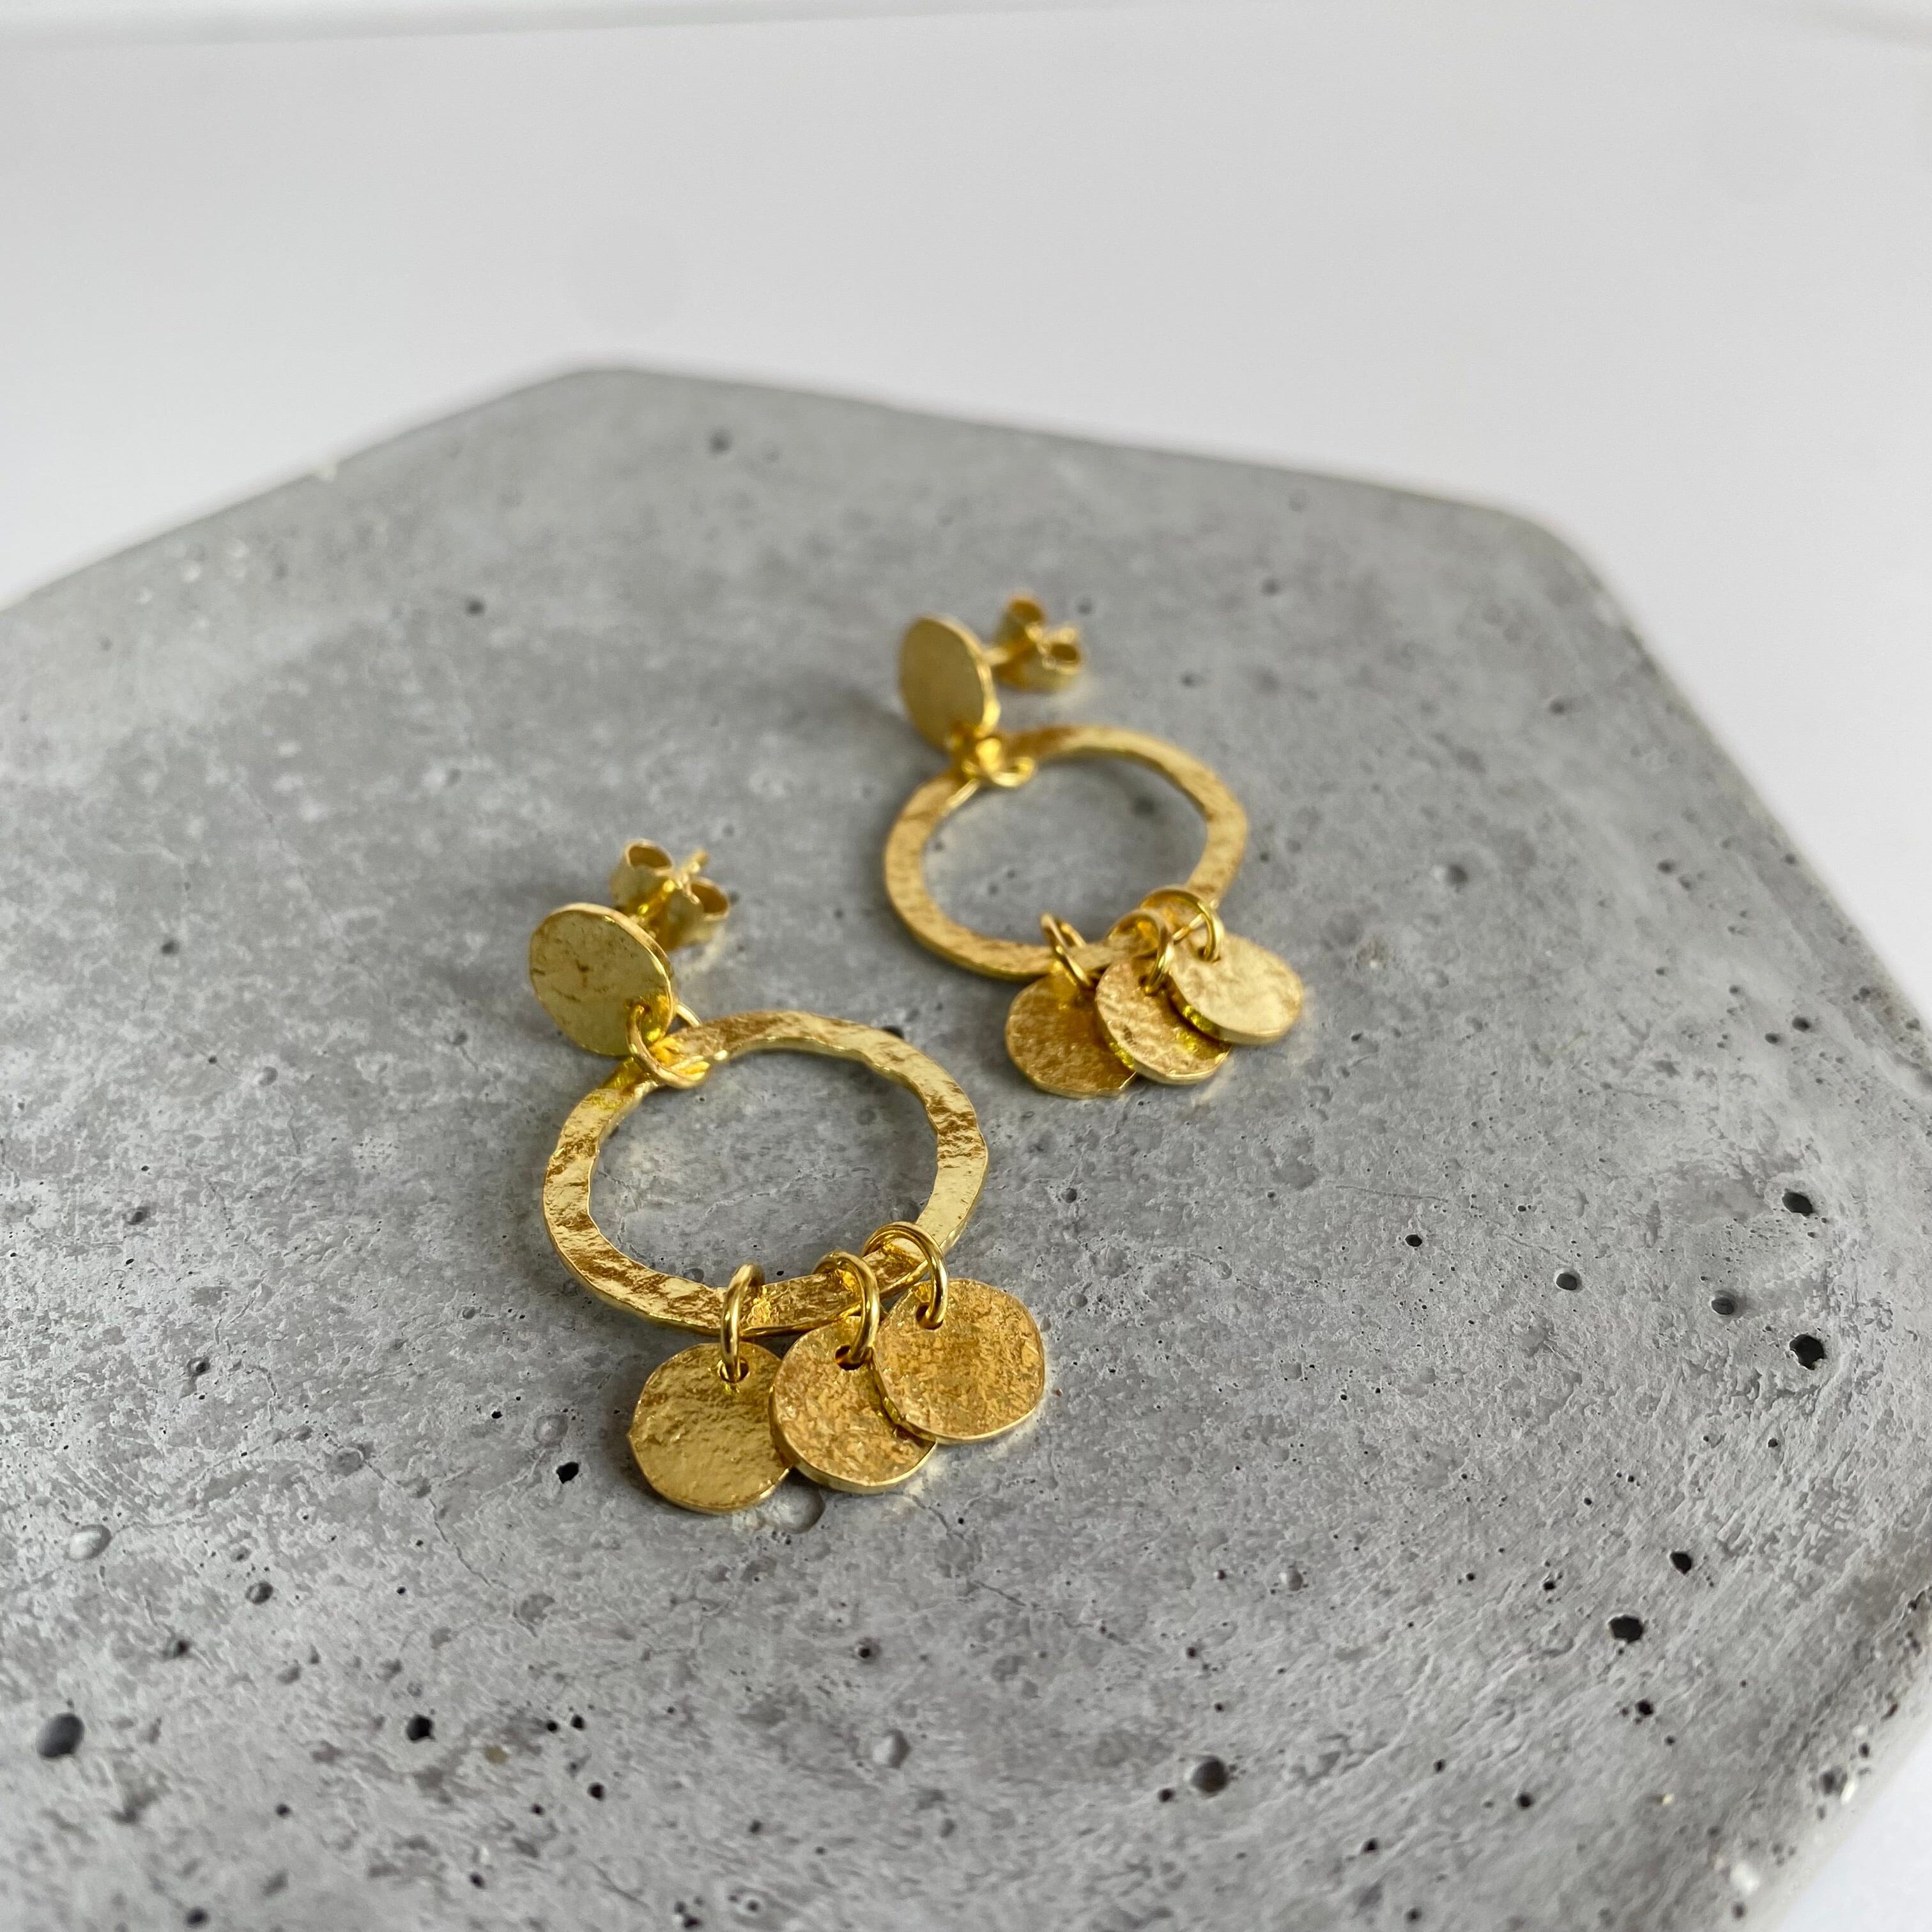 Hammered Collection - Lisa Carney Jewelry Lisa Carney Designs Moon Glimmer Earrings Gold Plated 30mm